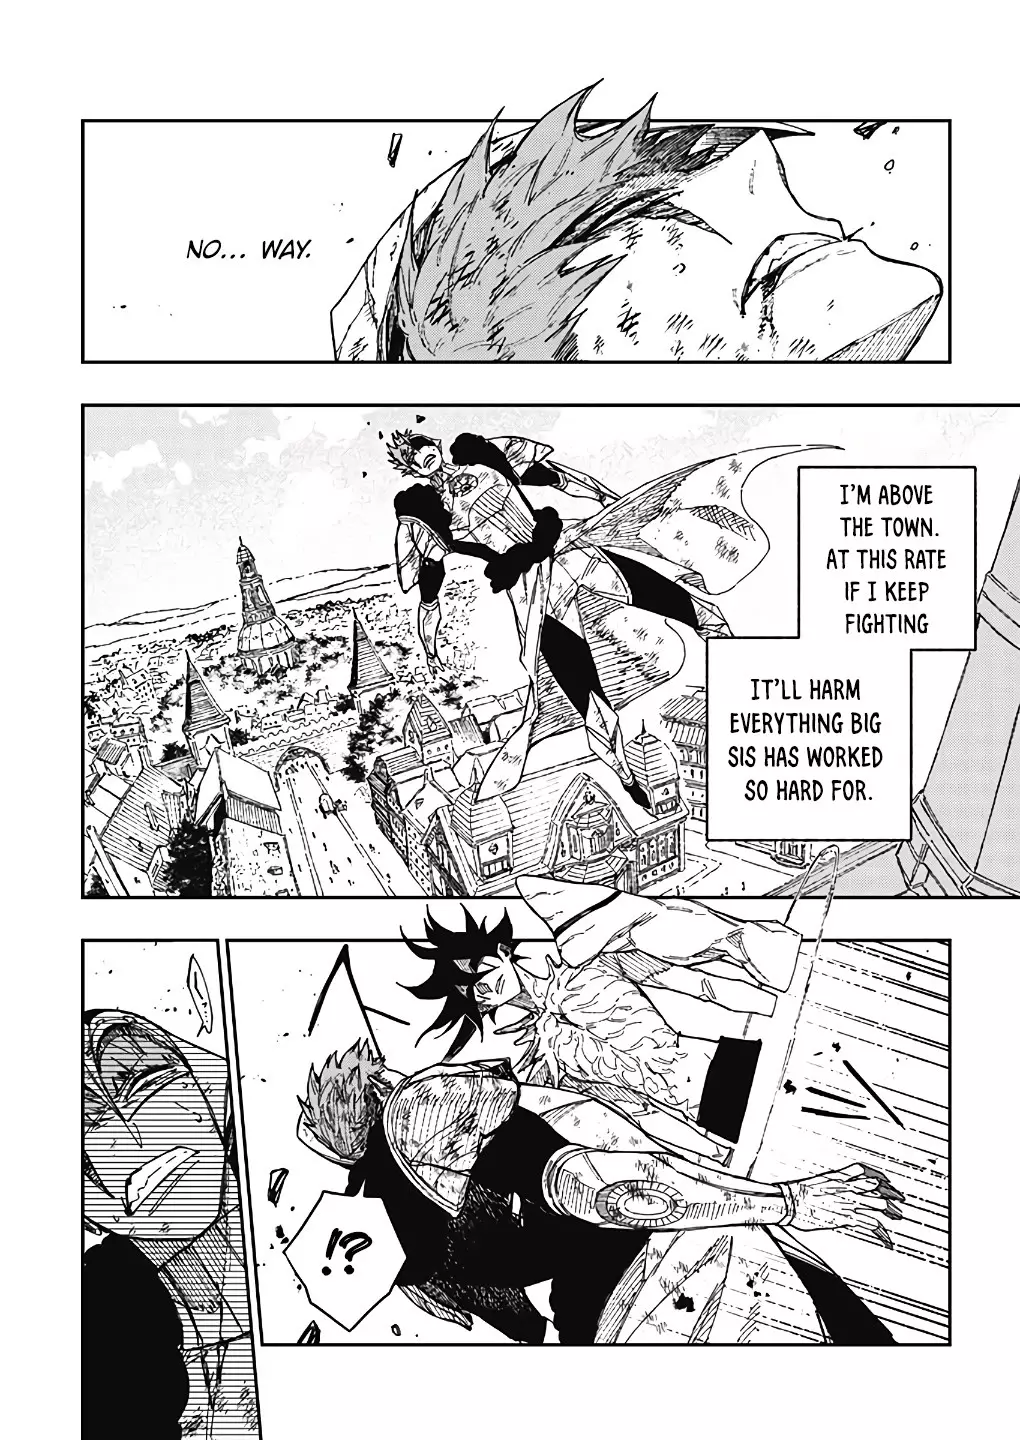 My Companion Is The Strongest Undead In Another World - 19 page 13-3431cf28